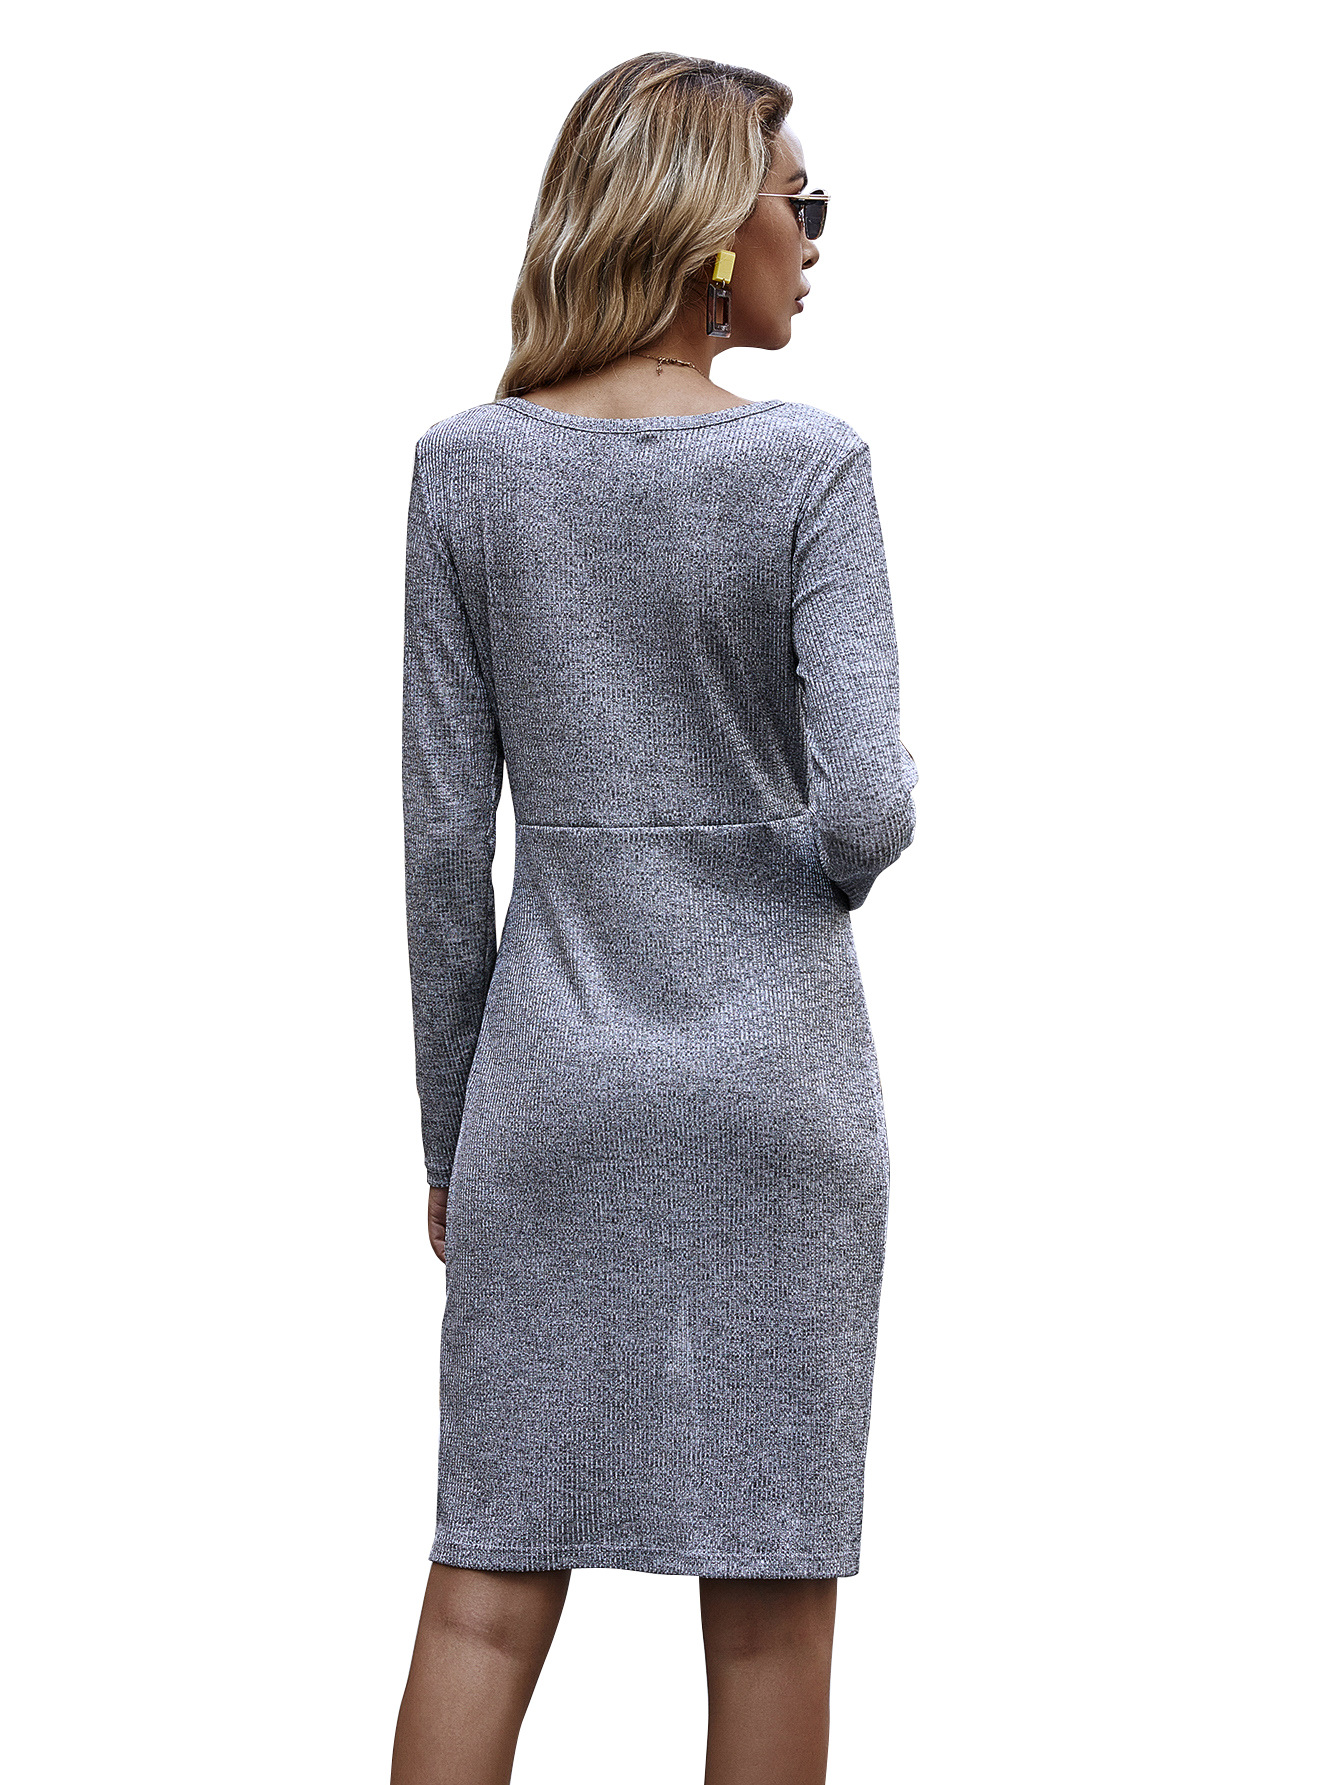 autumn women s retro casual loose mid-length pleated women s long-sleeved dress wholesale NHDF46